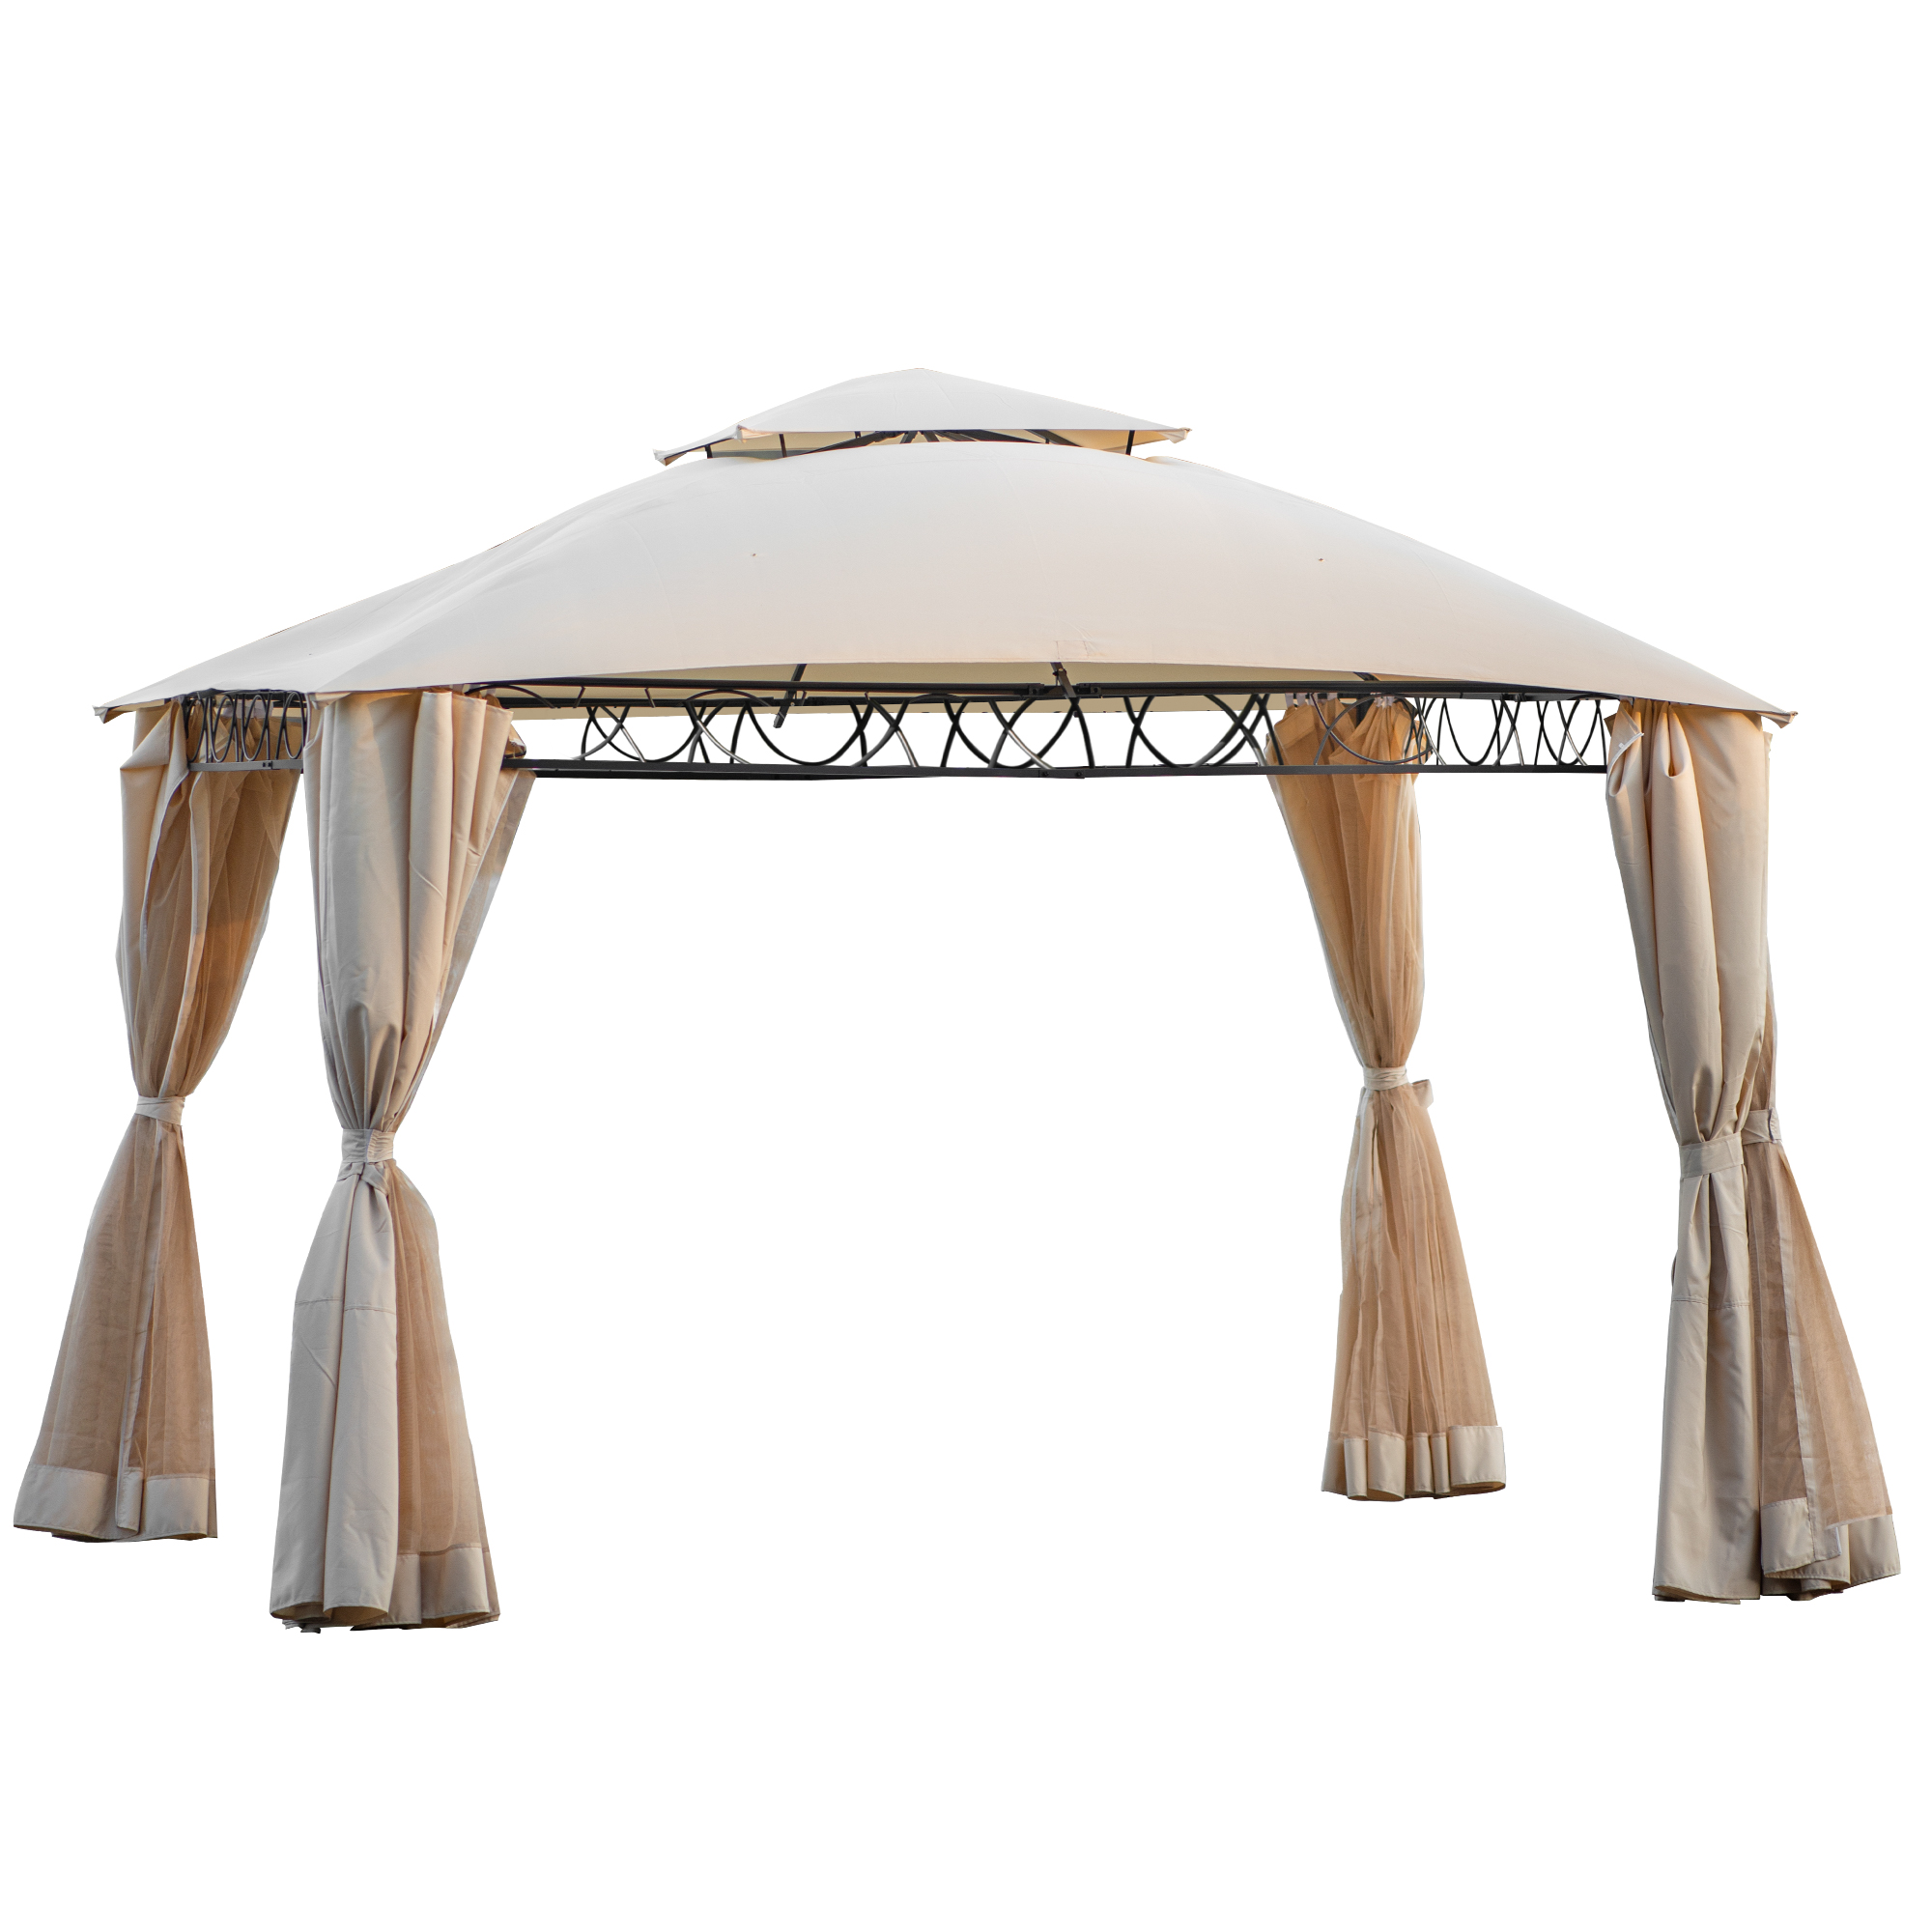  Quality Double Tiered Grill Canopy, Outdoor BBQ Gazebo Tent with UV Protection, Beige-CASAINC